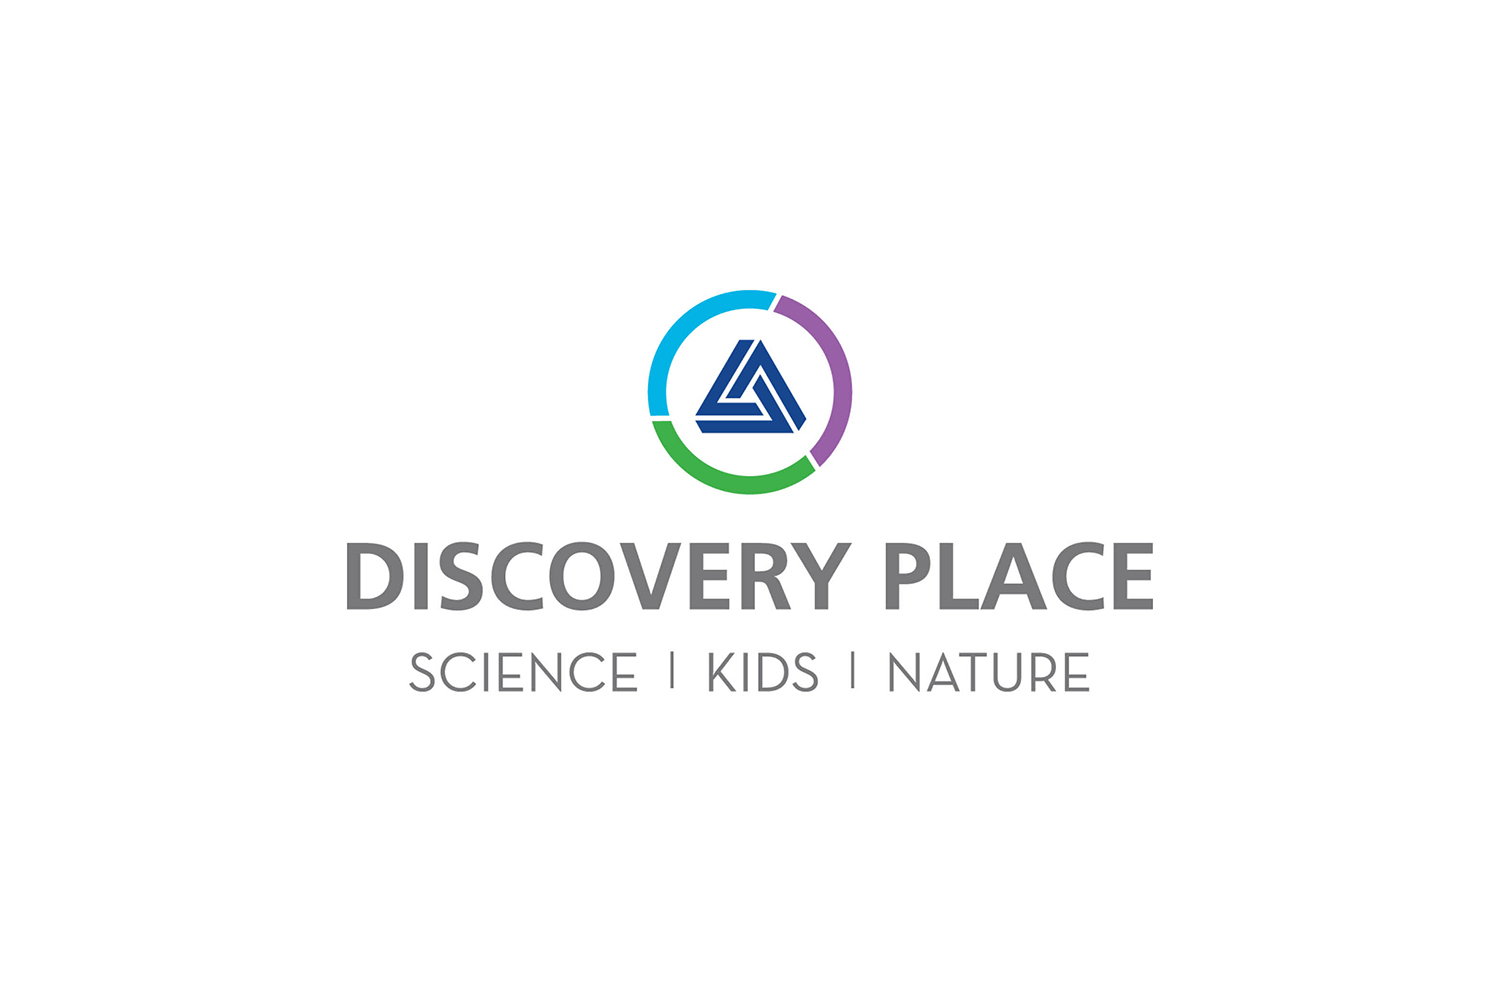 Boss_Display_Client_Discovery_Place_Logo.jpg